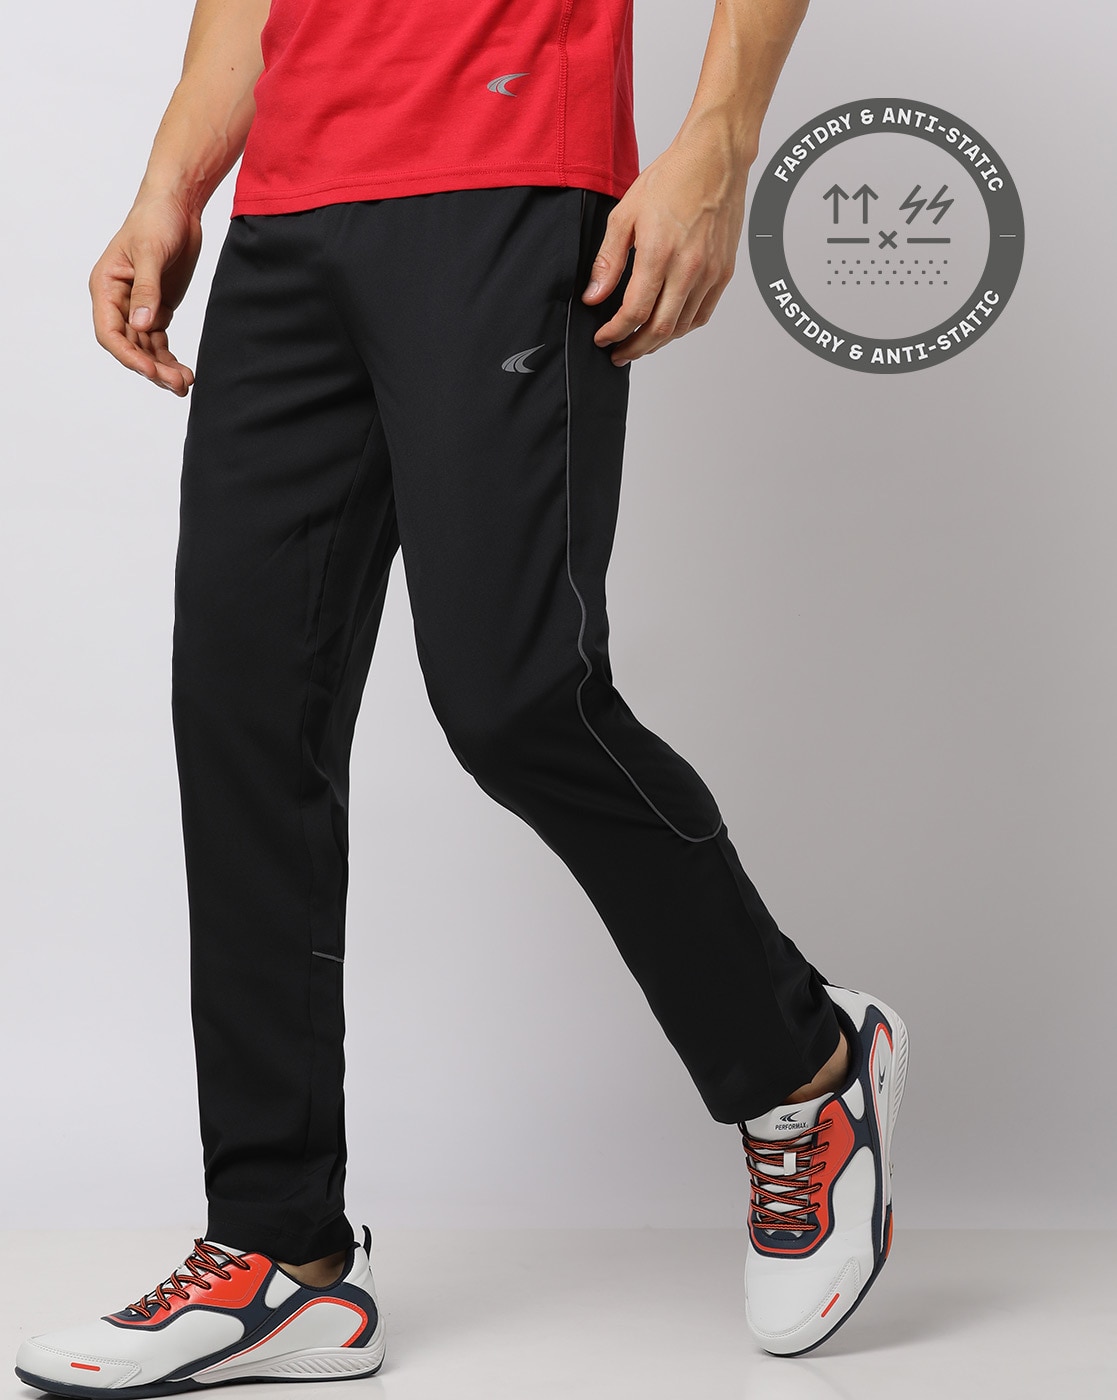 Experience more than 202 performax track pants